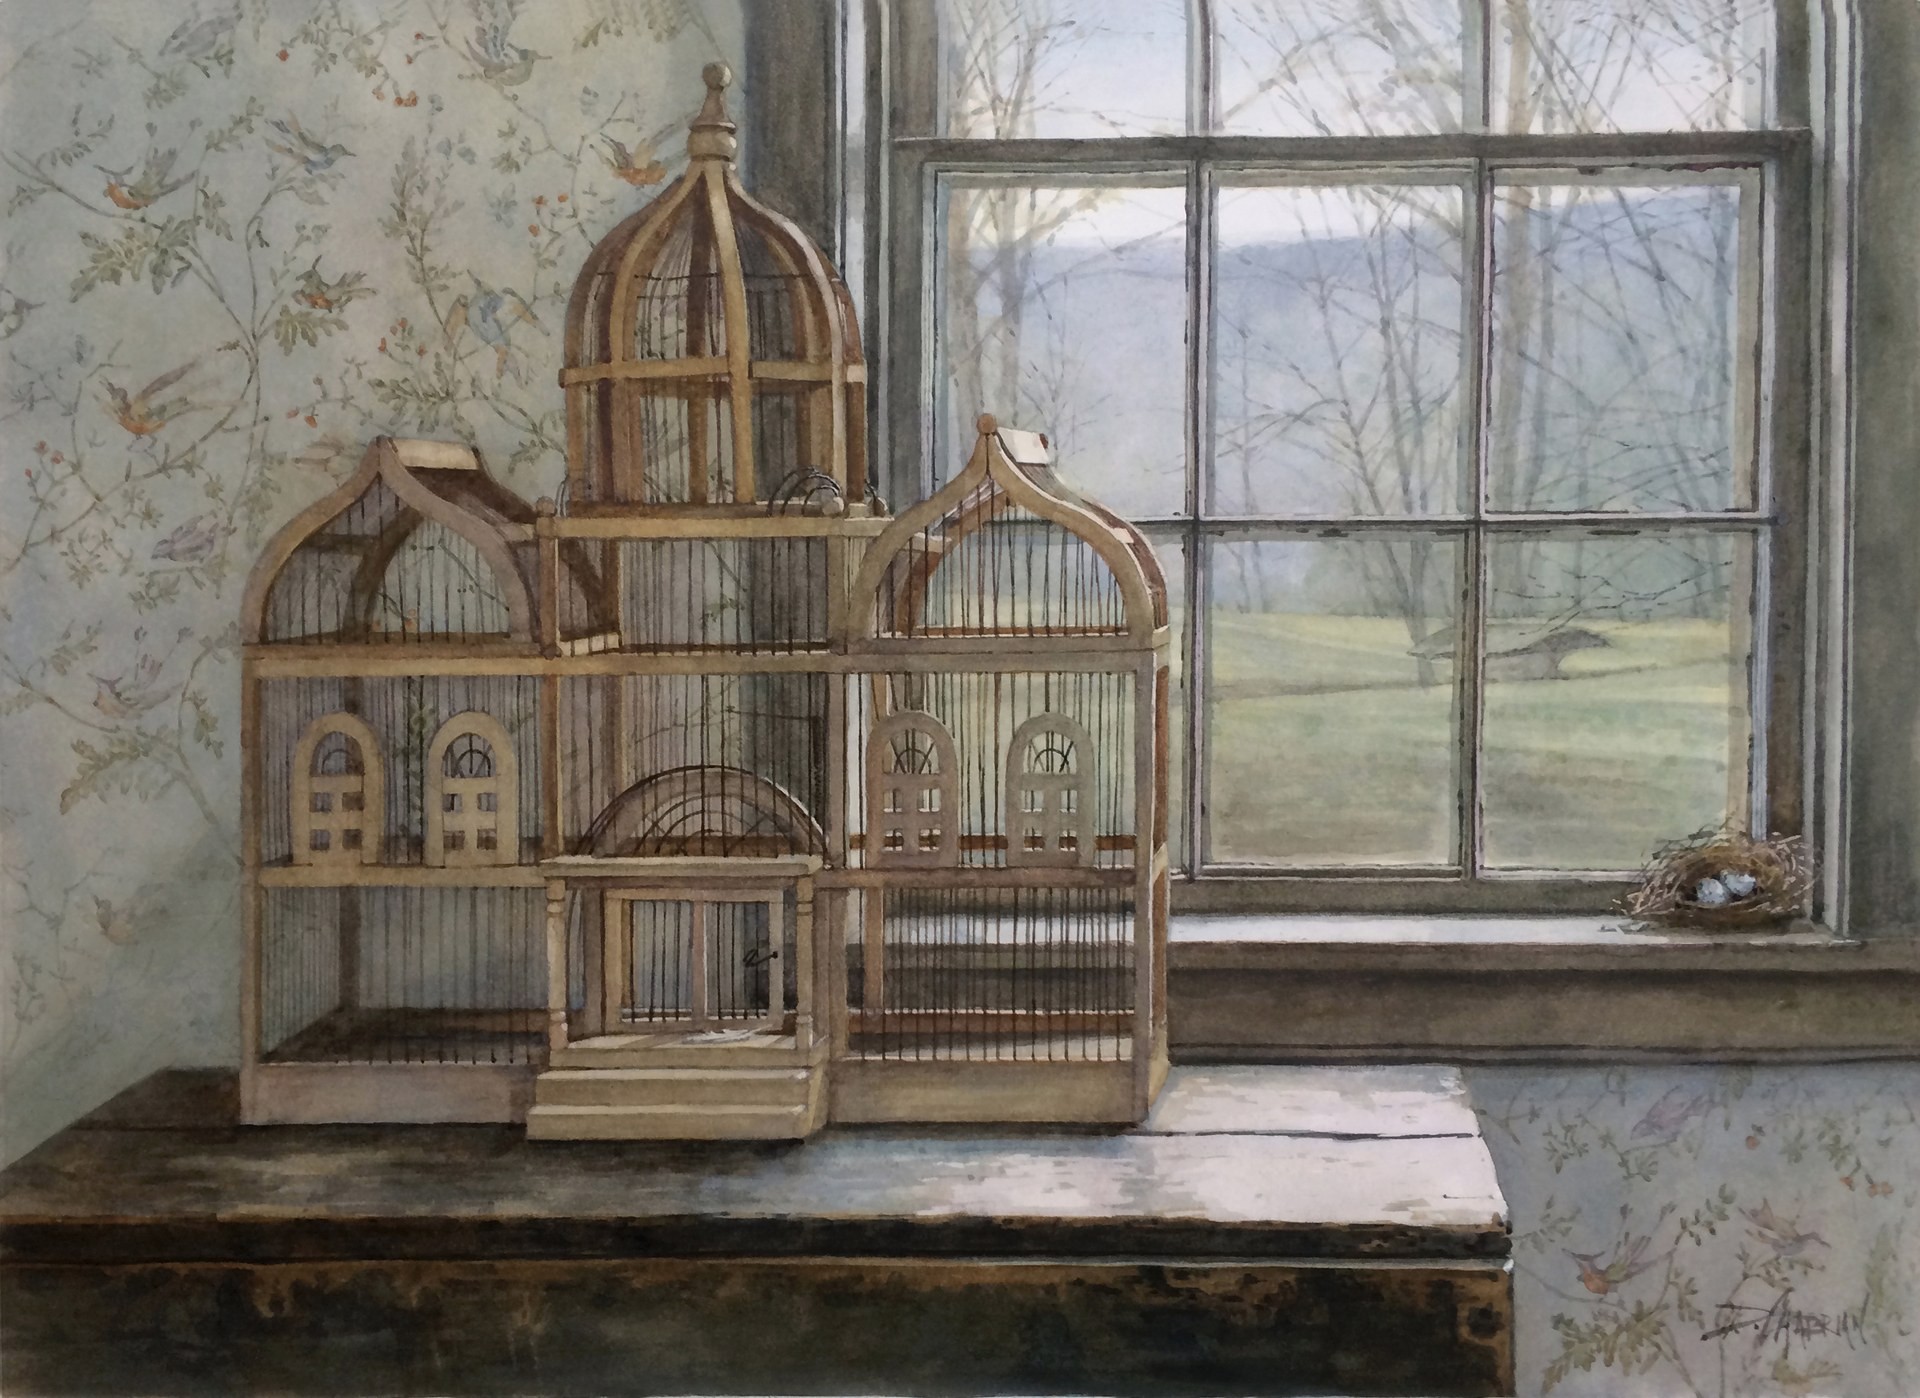 13th Annual PleinAir Salon Annual Competition Top 25 Finalist Deborah Chabrian Empty Nest decorative nests on table next to window watercolor painting